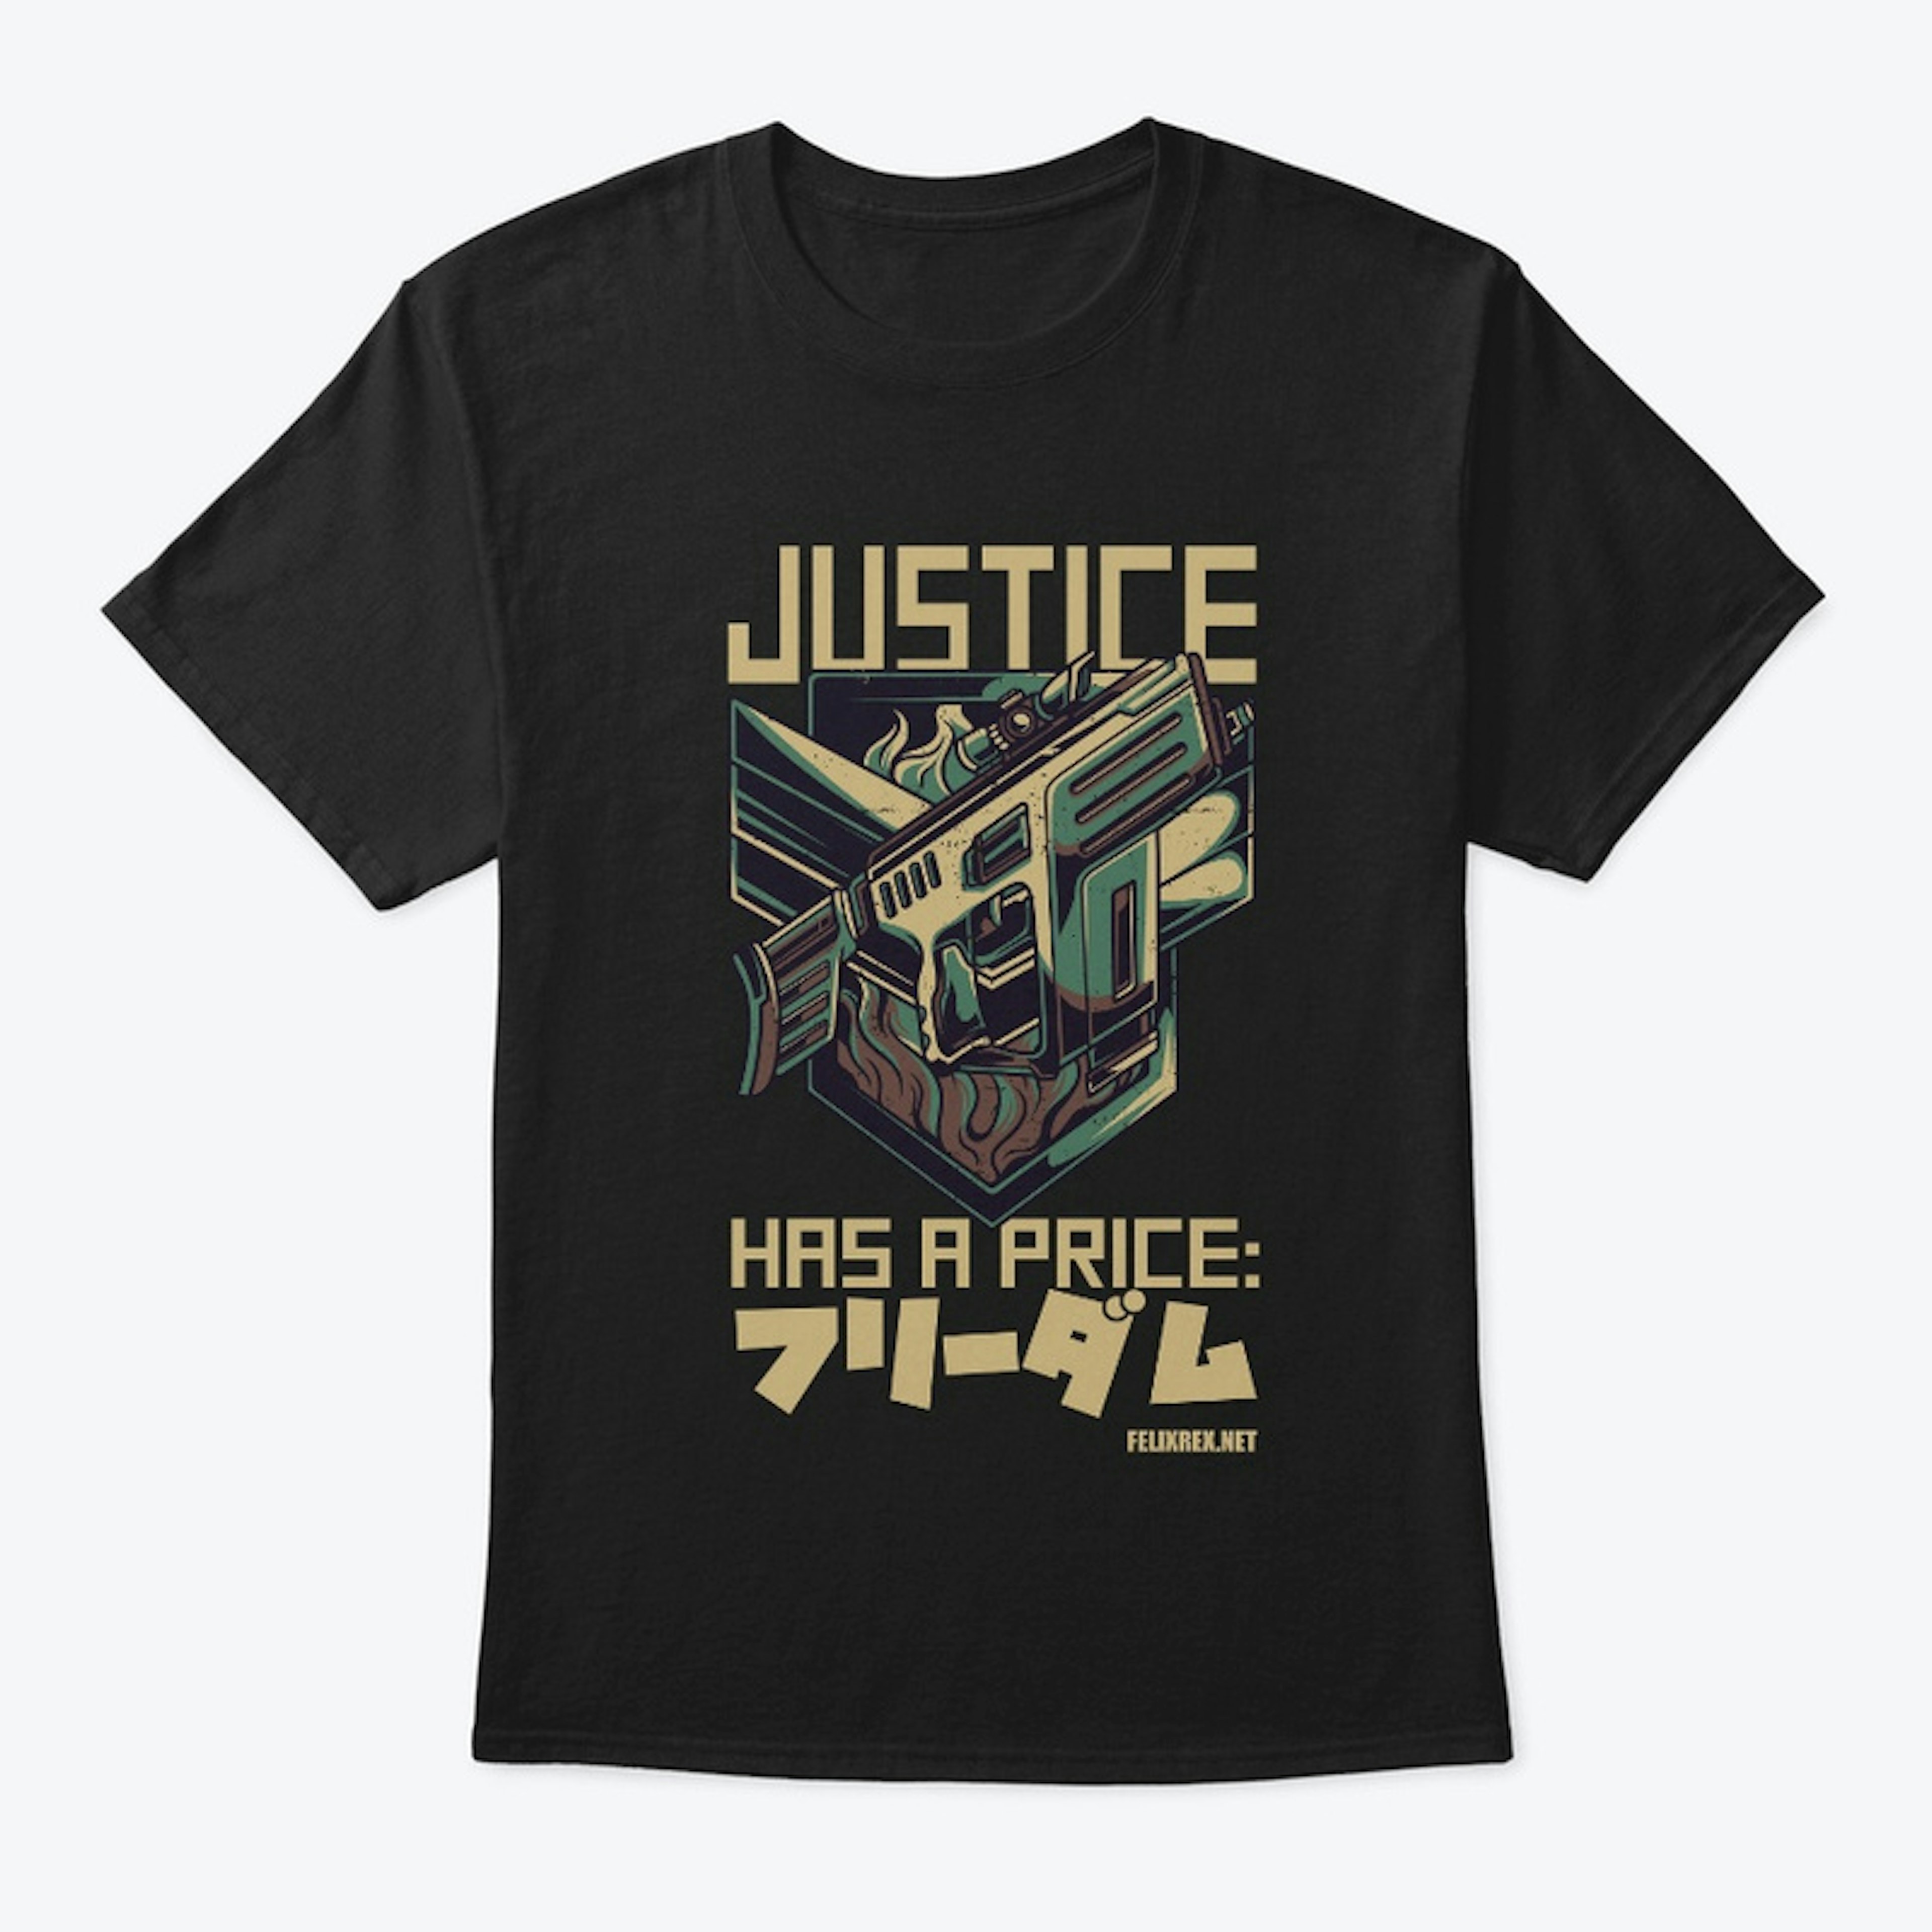 'Justice has a price. 